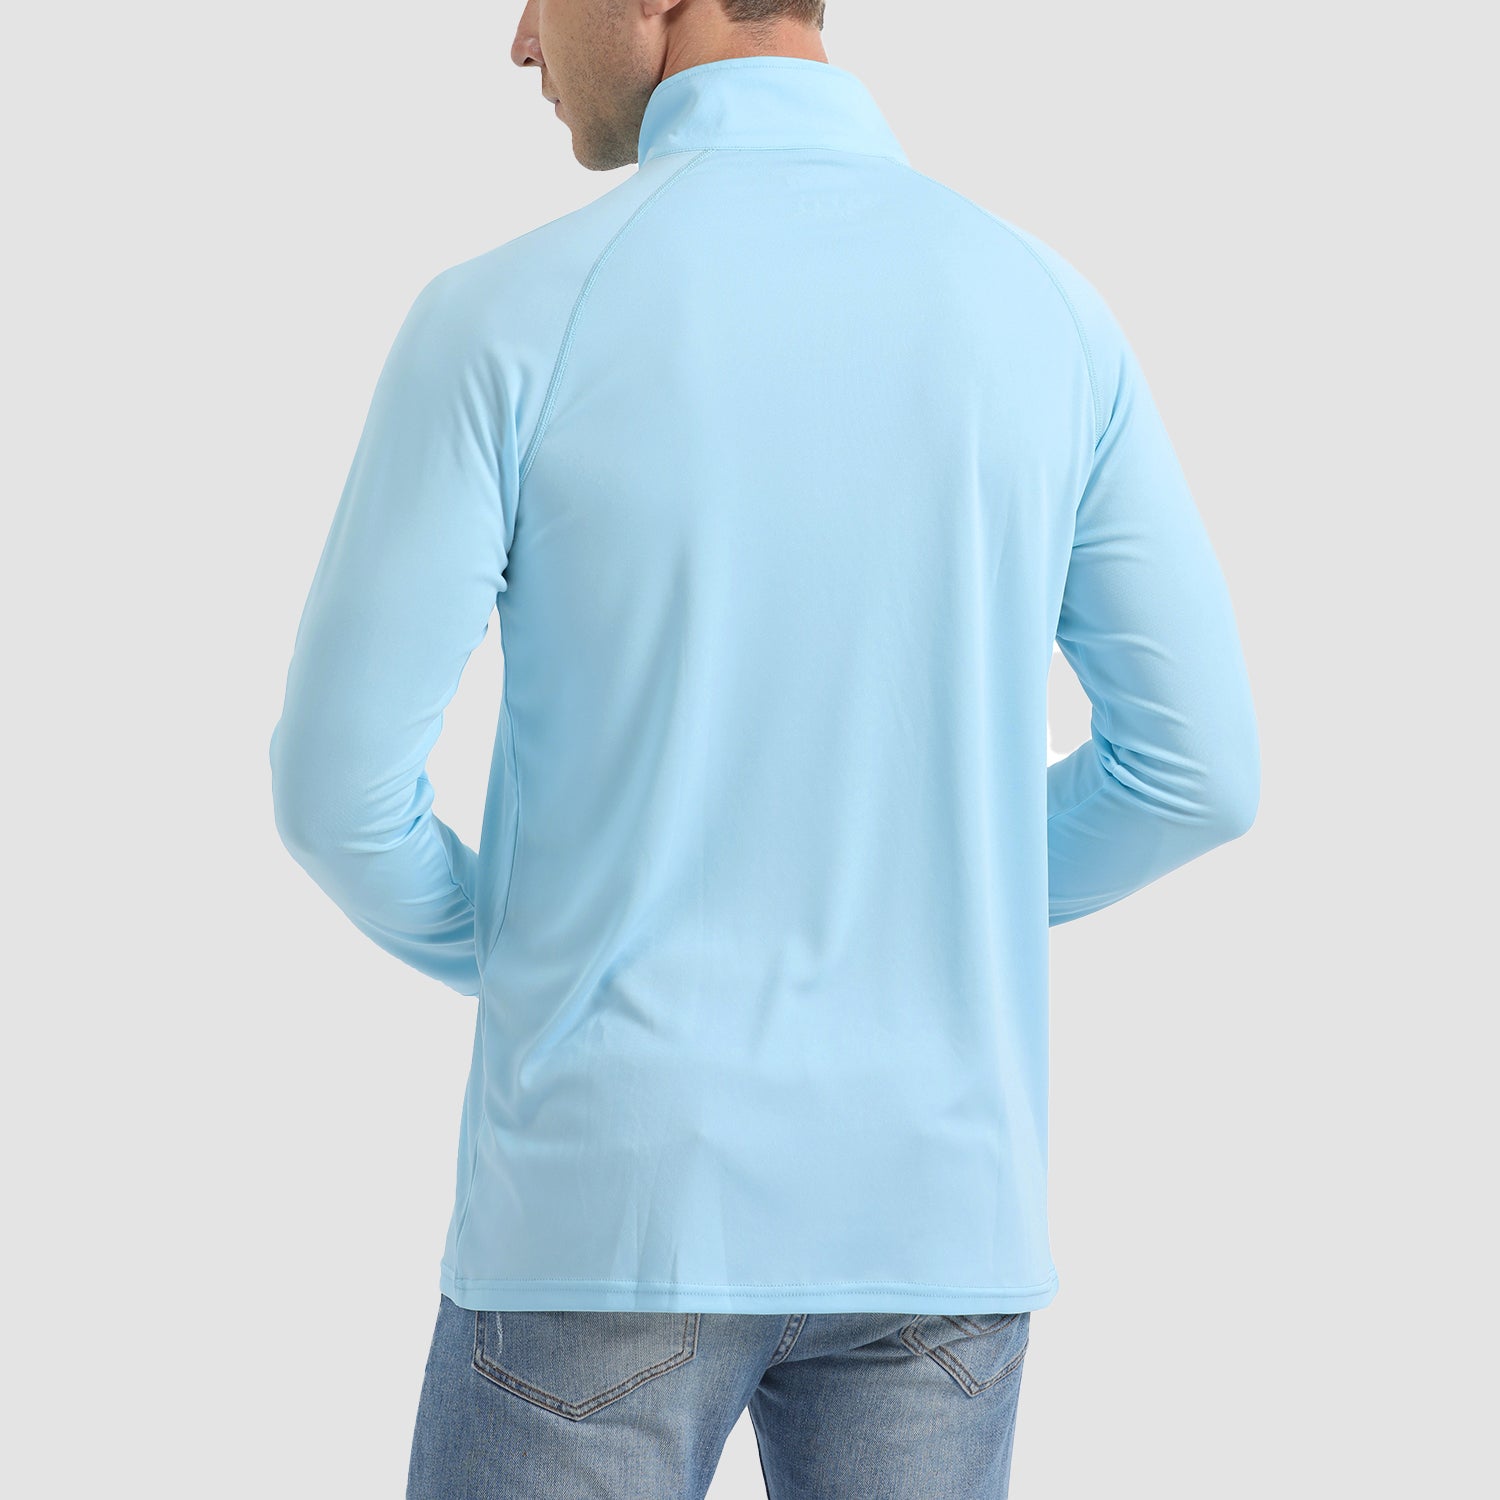 Men's UPF 50 Quick Dry Shirts 1/4 Zip Breathable Long Sleeve Shirts for Outdoor Sports